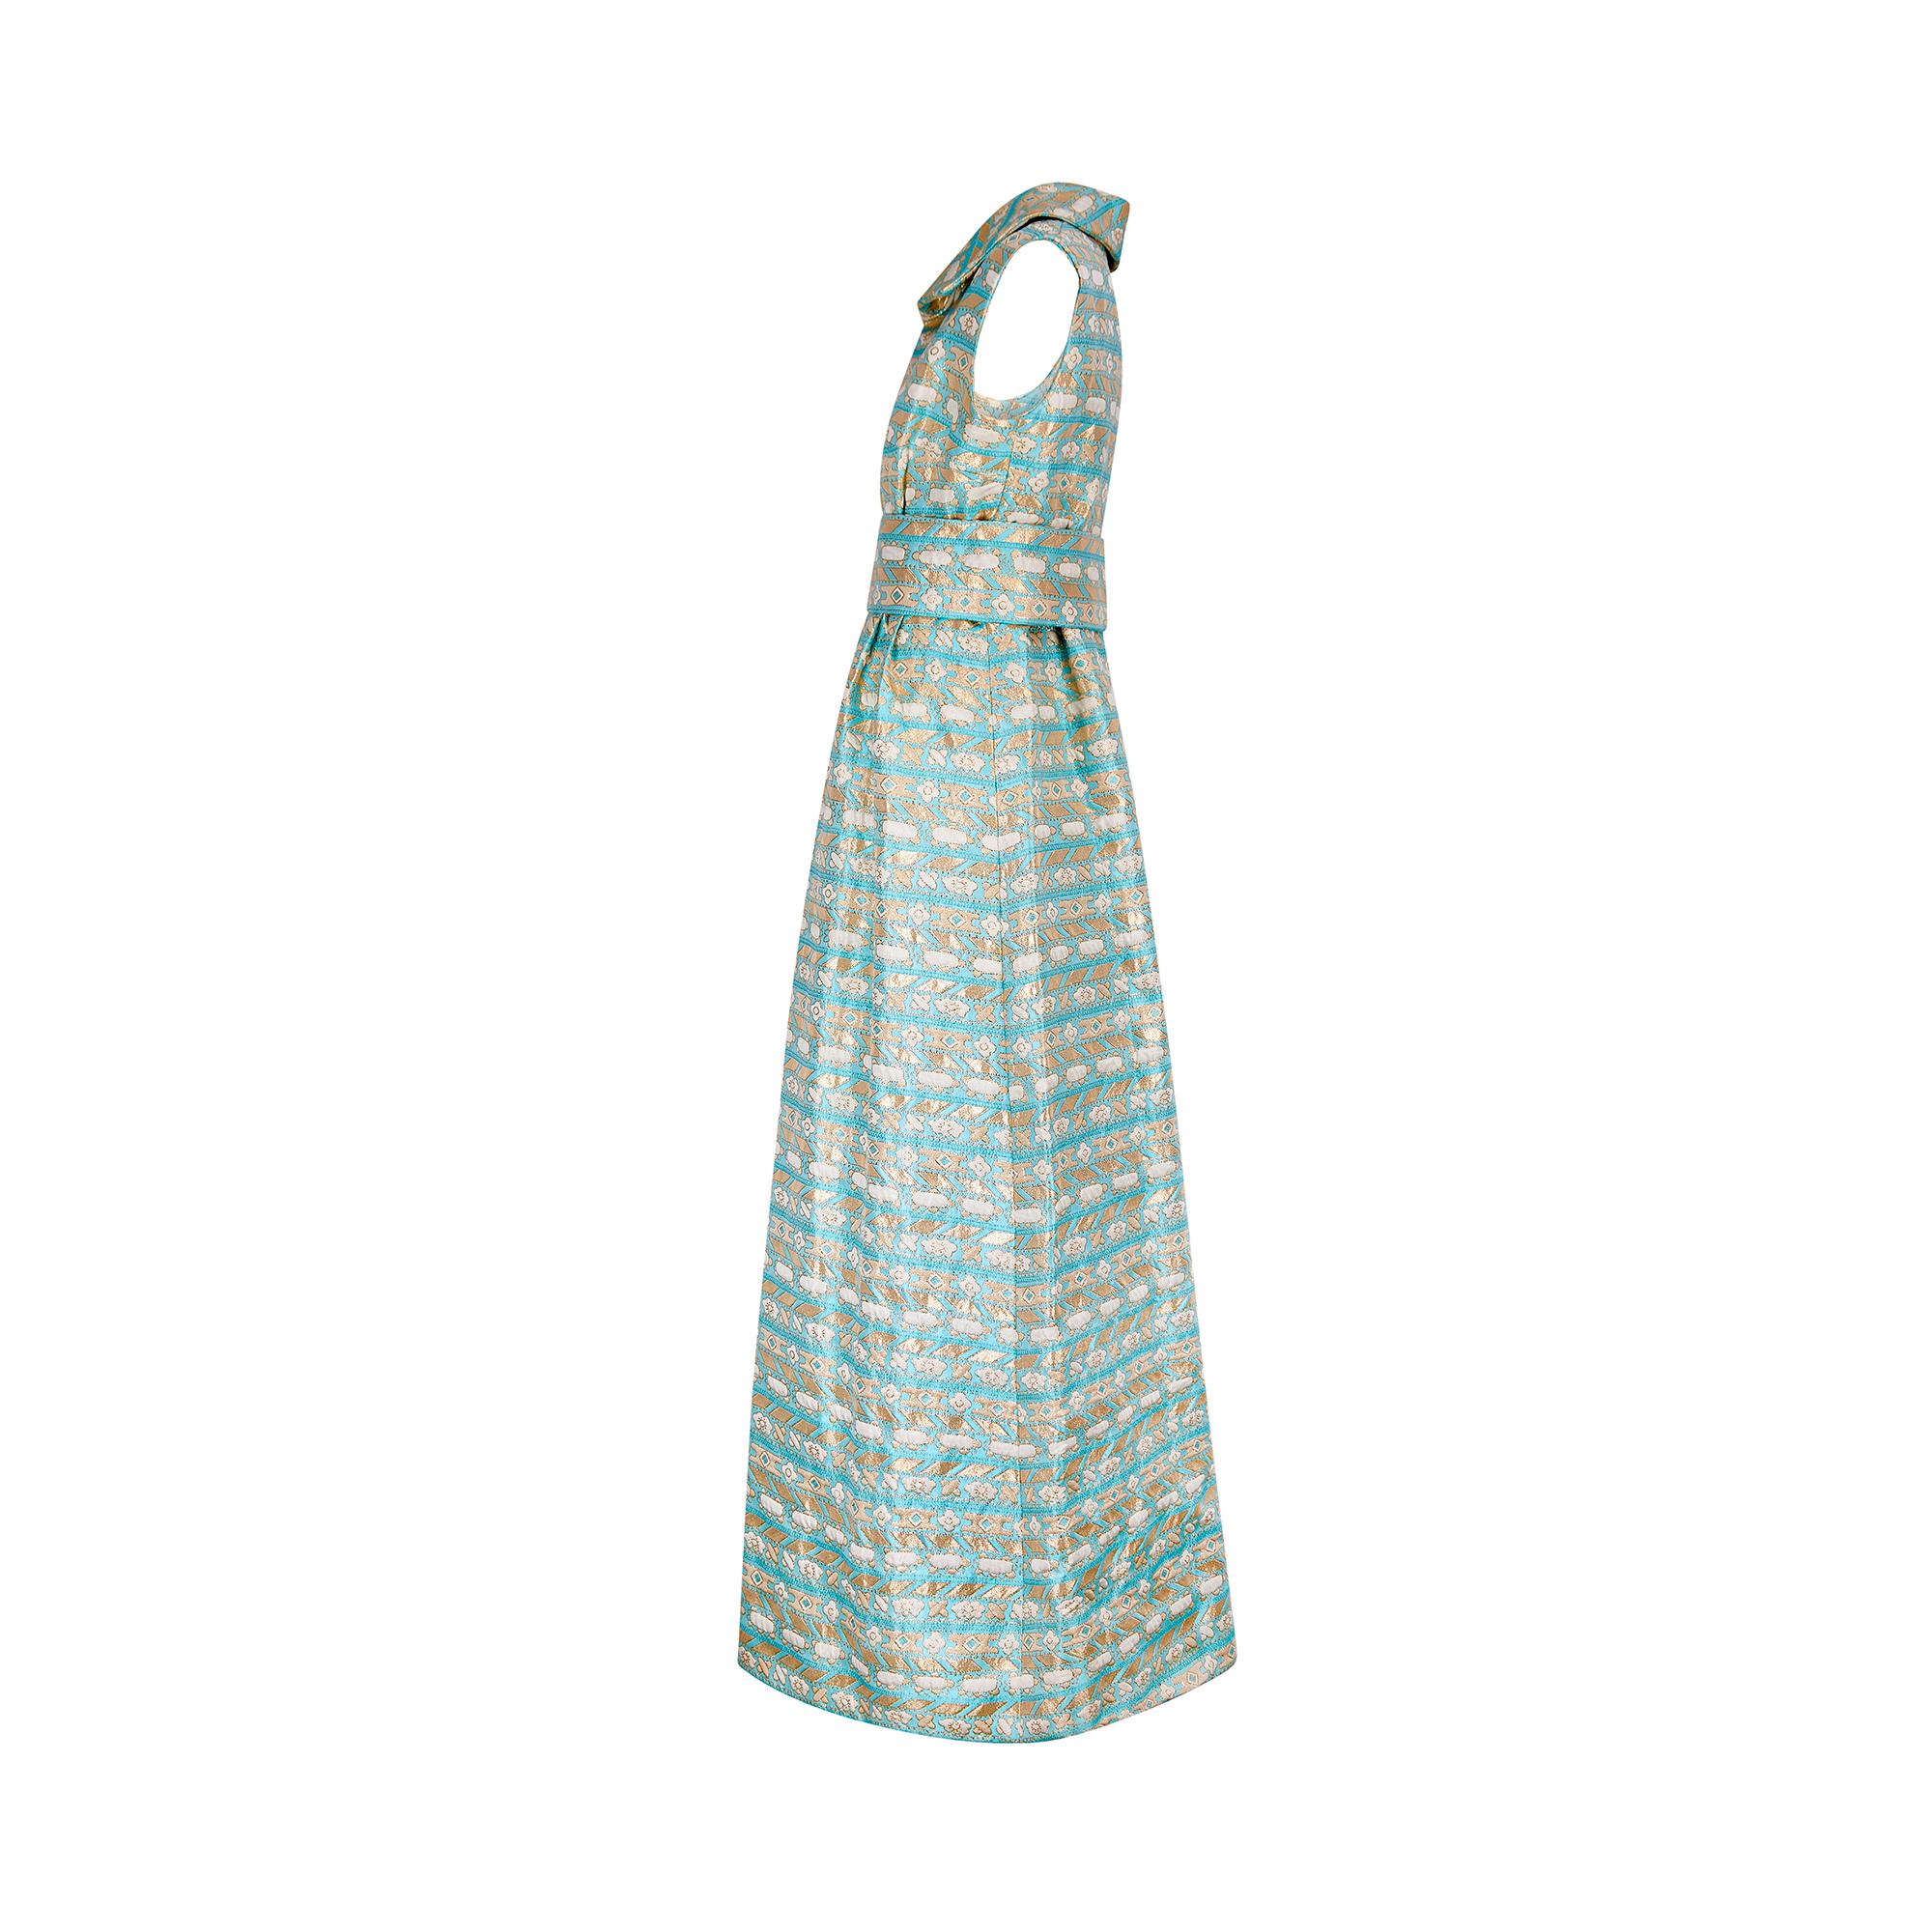 This striking gown was couture crafted in the late 1960s to early 1970s. The fabric is really the star of the show; thick aqua jacquard is textured with geometric, floral and cloud-shaped embroidery in glittering metallic gold. This dress comes